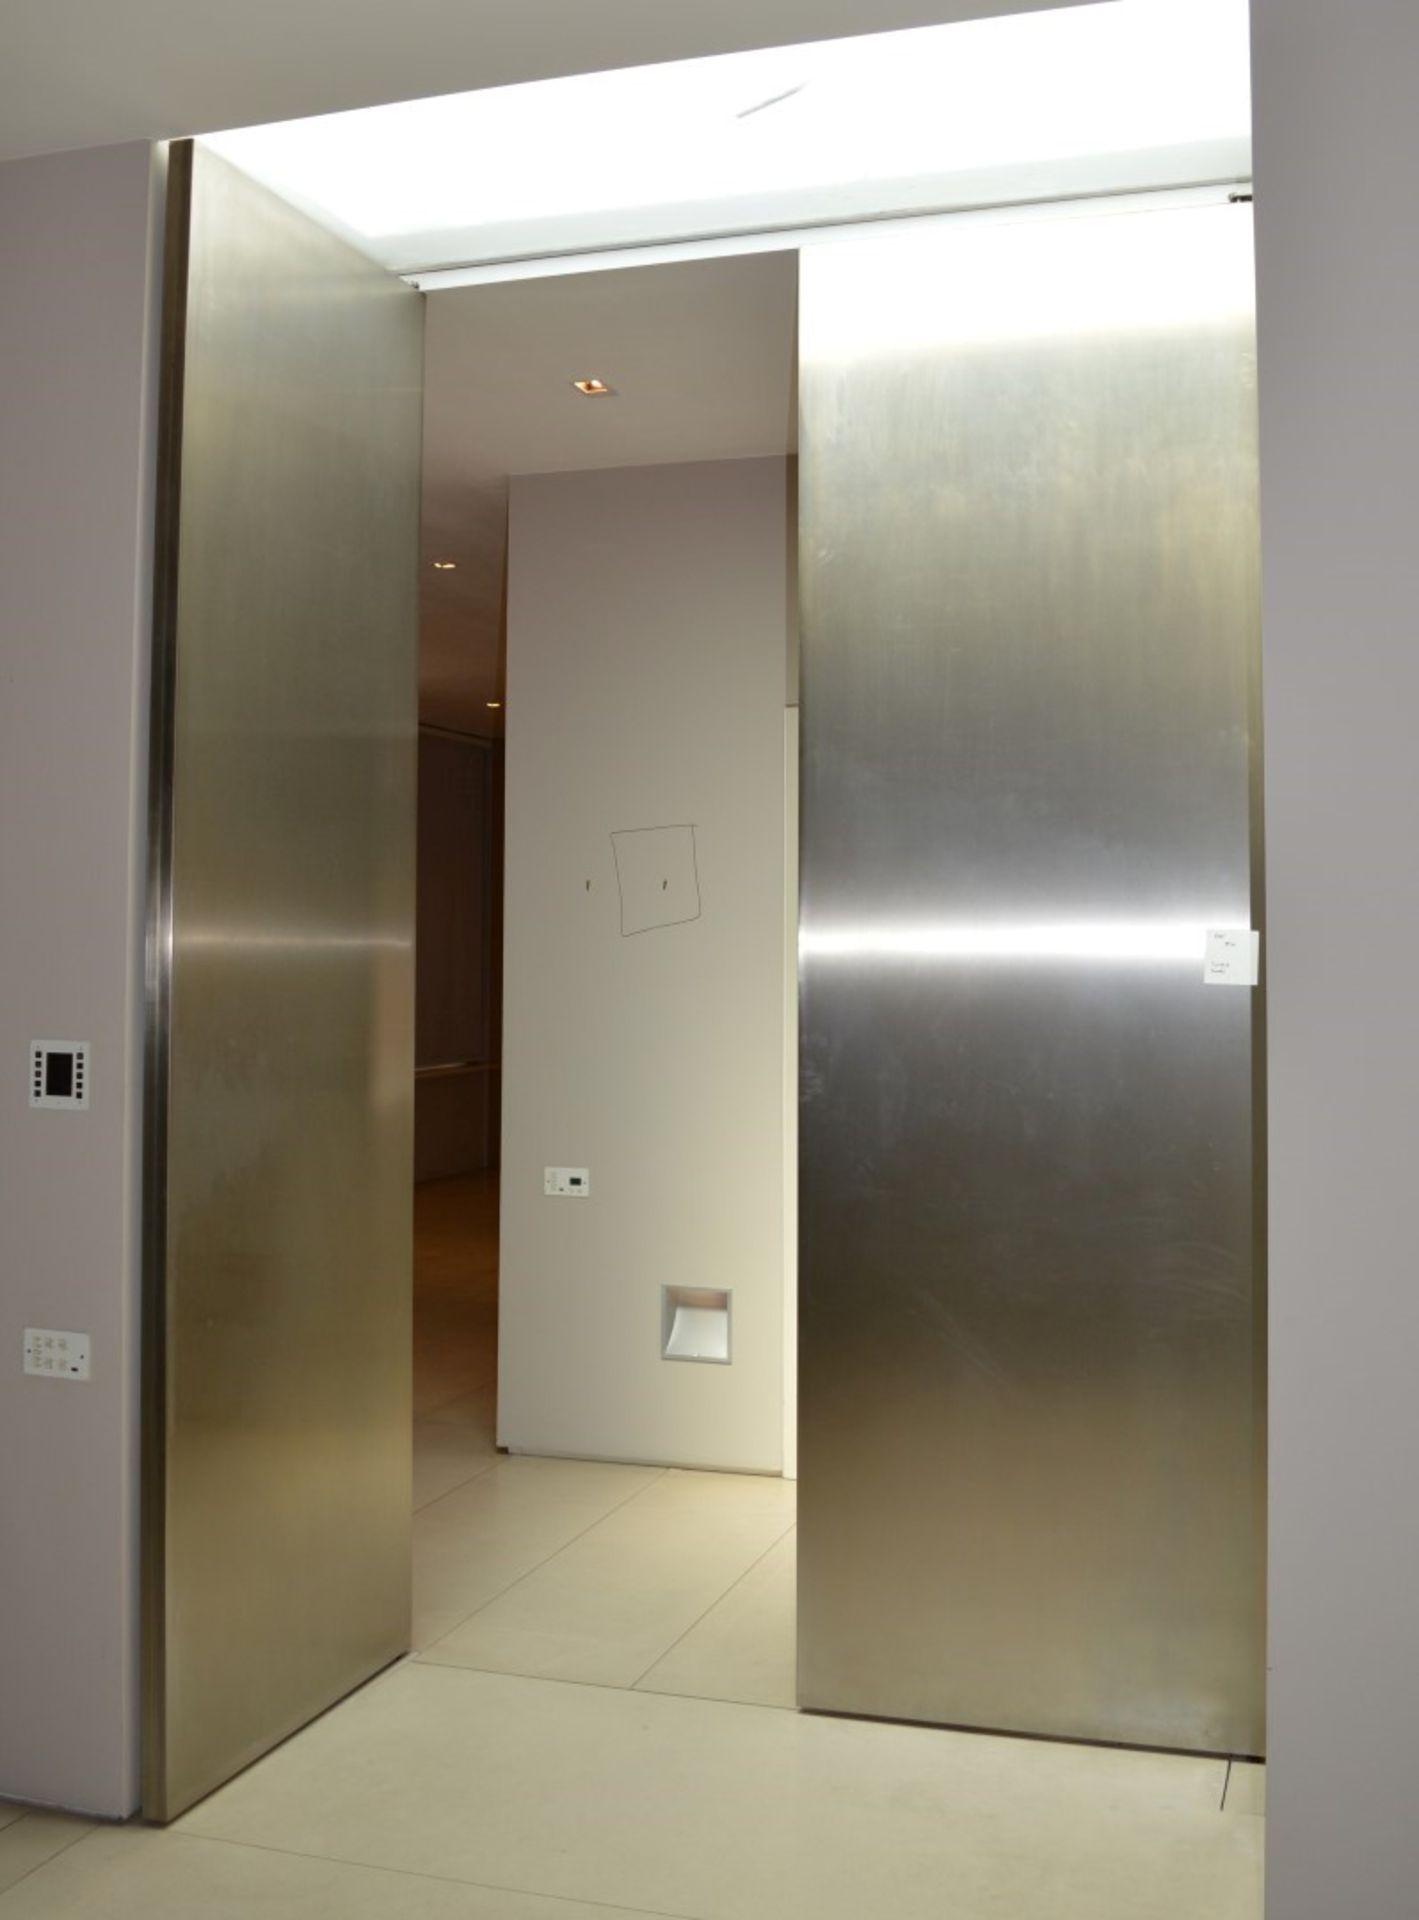 2 x Bespoke Internal Doors With Stainless Steel Finish - Pair of - Large Size - Ideal For Interior - Image 2 of 10